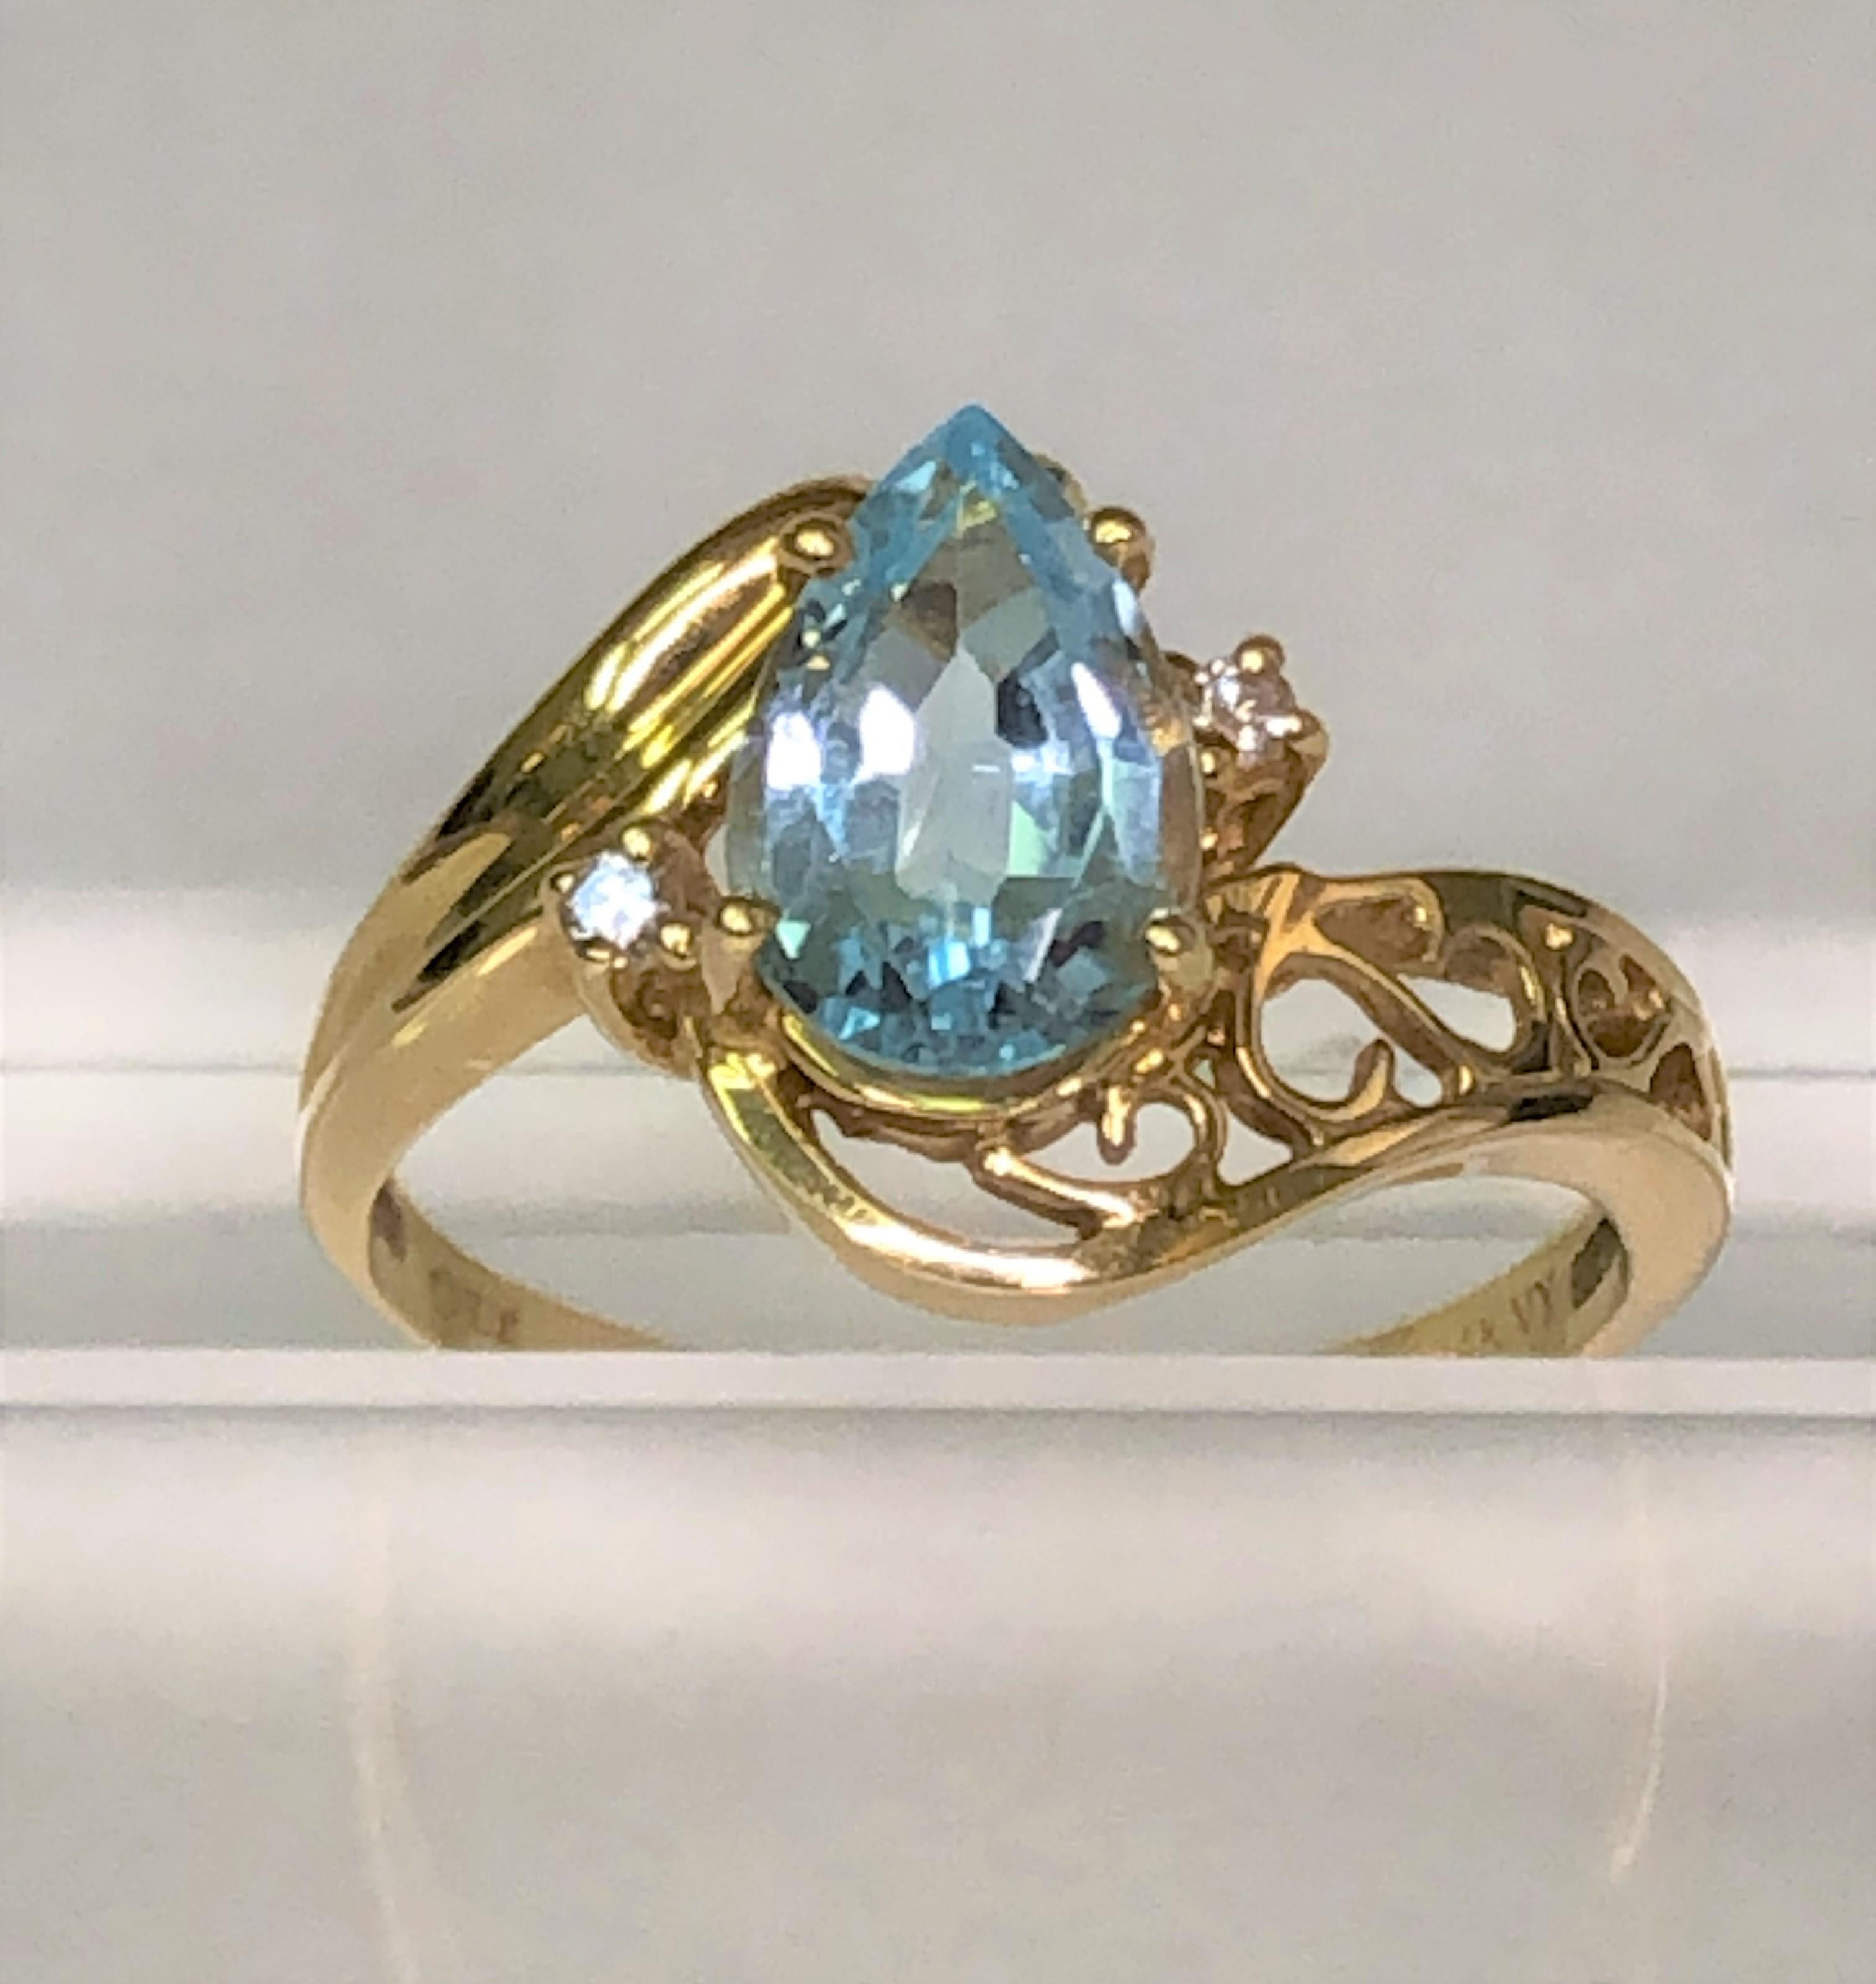 This classic ring will be great for anyone!  
14 karat yellow gold decorative mounting with pear cut blue topaz and two round diamonds.
Beautiful prong set pear shaped blue topaz.  Approximately 9mm x 6mm.
Two prong set round diamonds. 